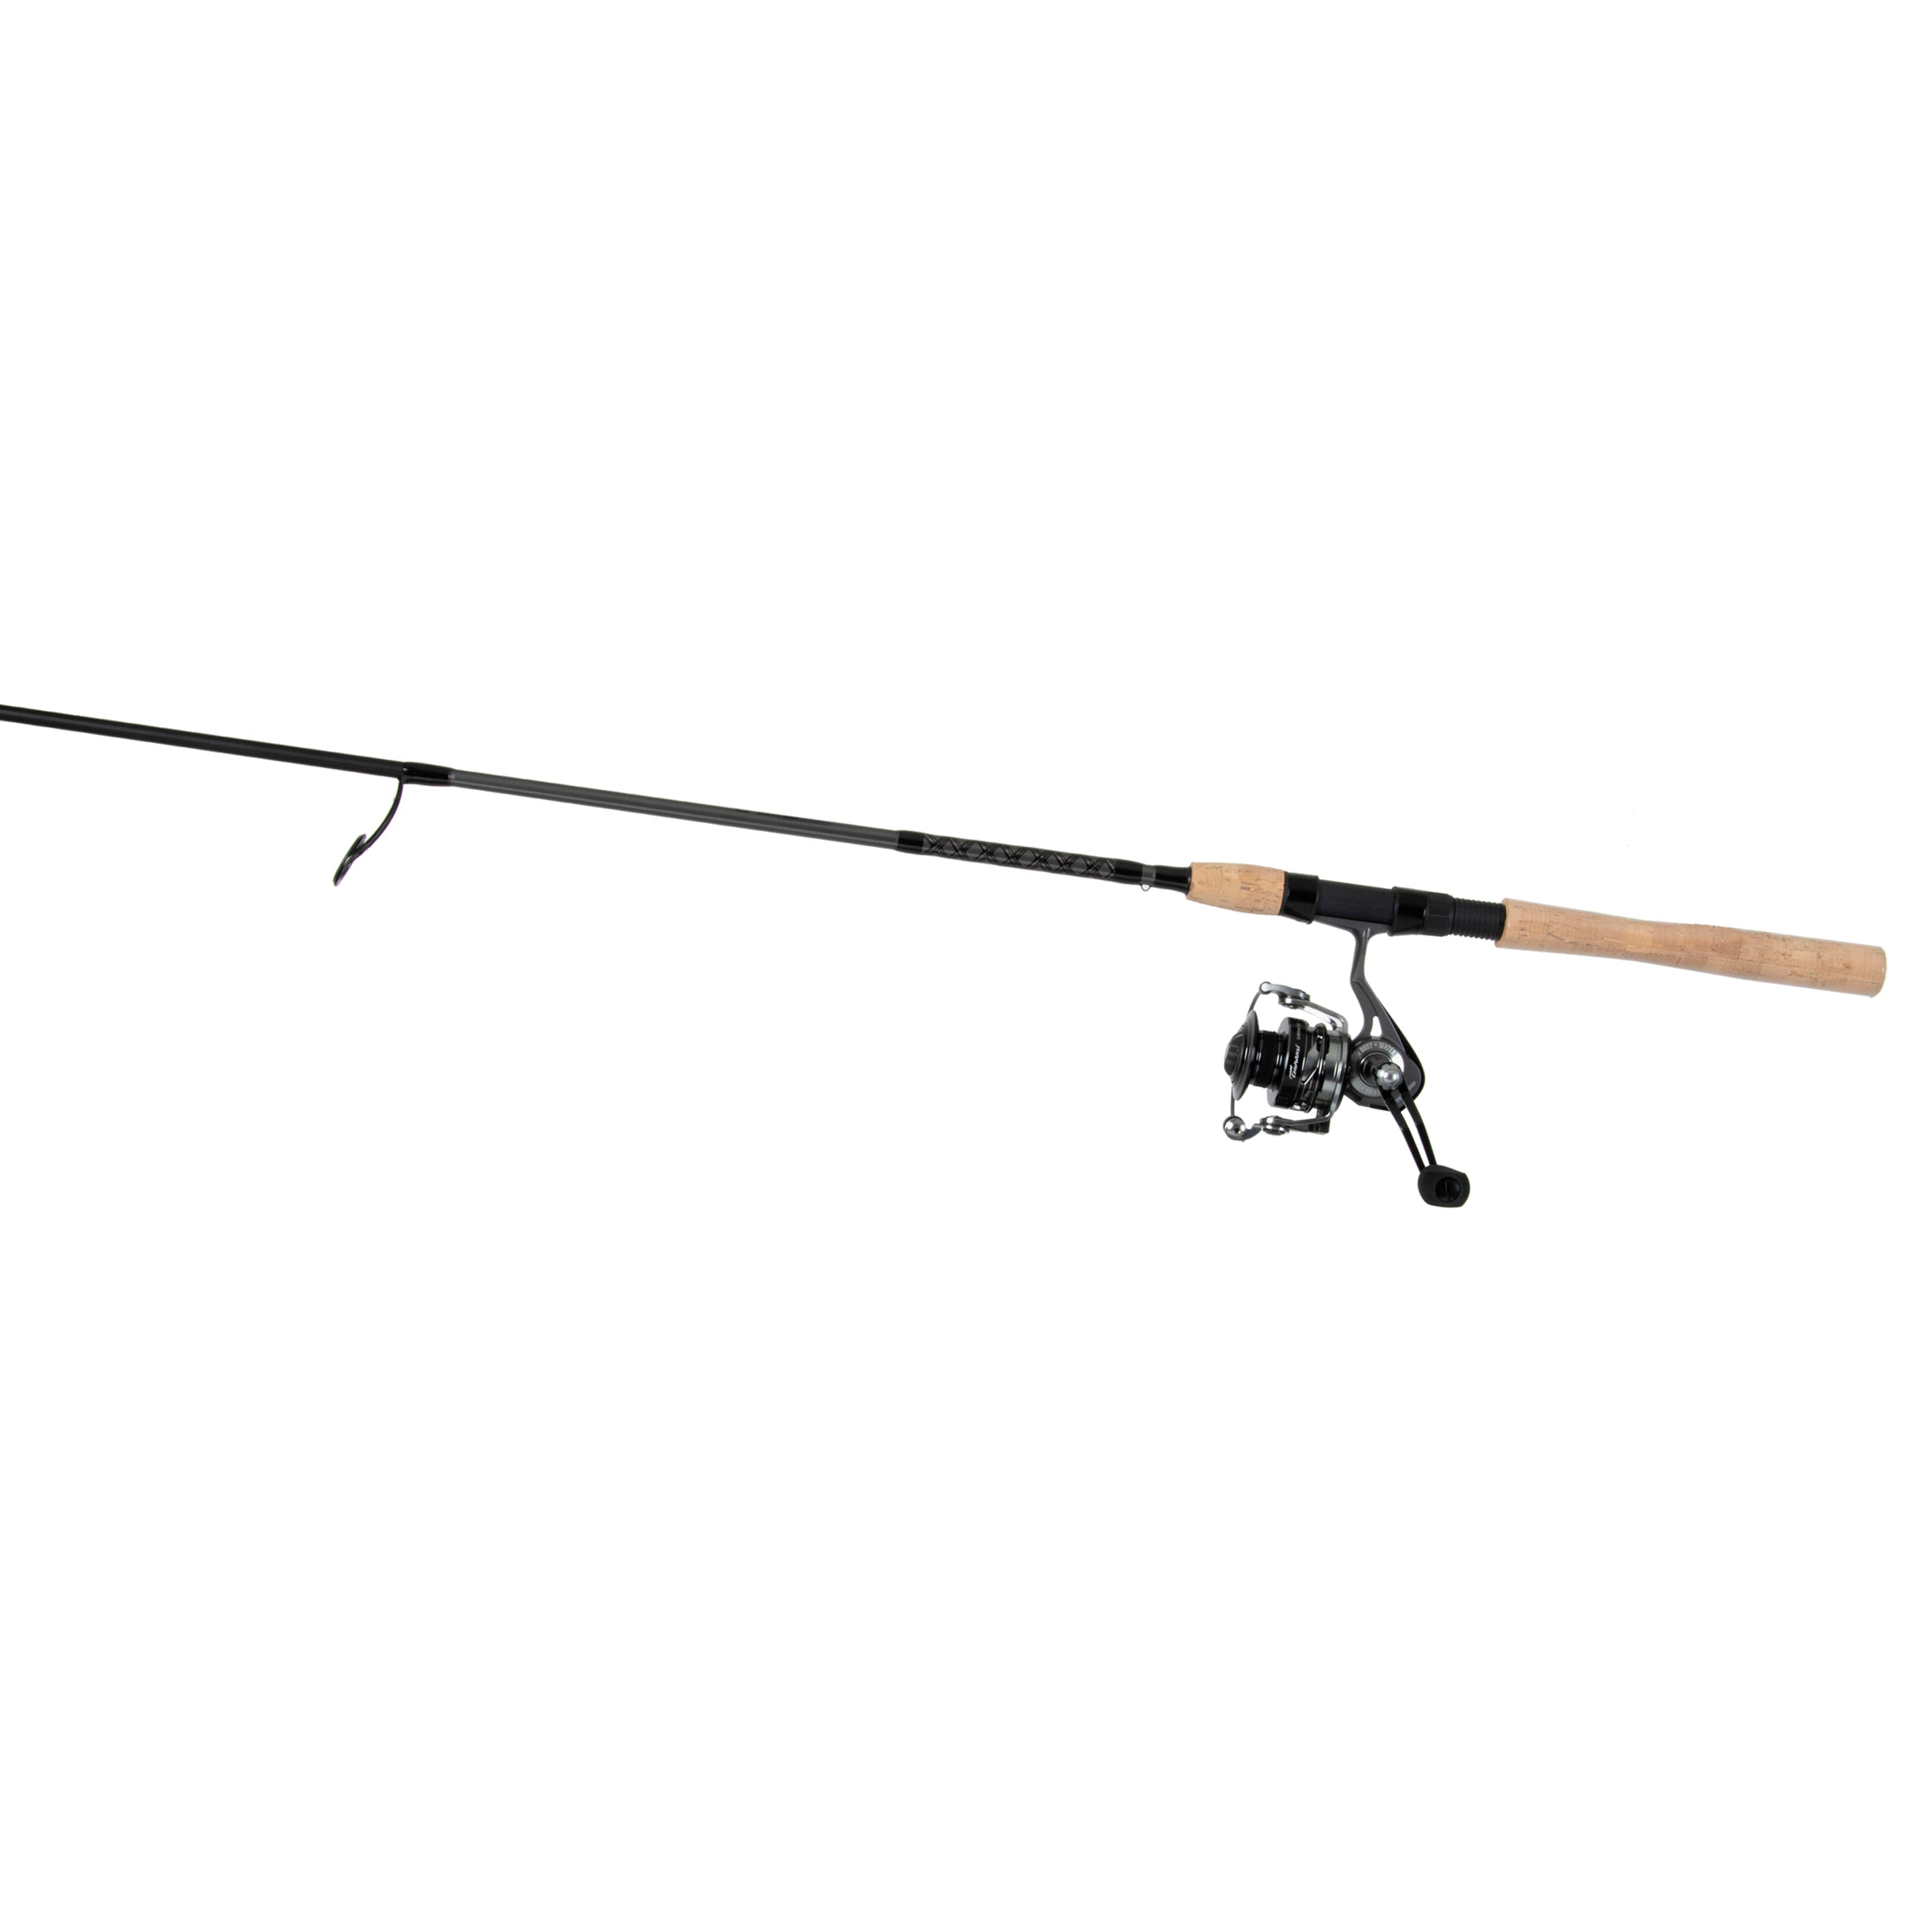 Carp fishing rods and reels for Sale